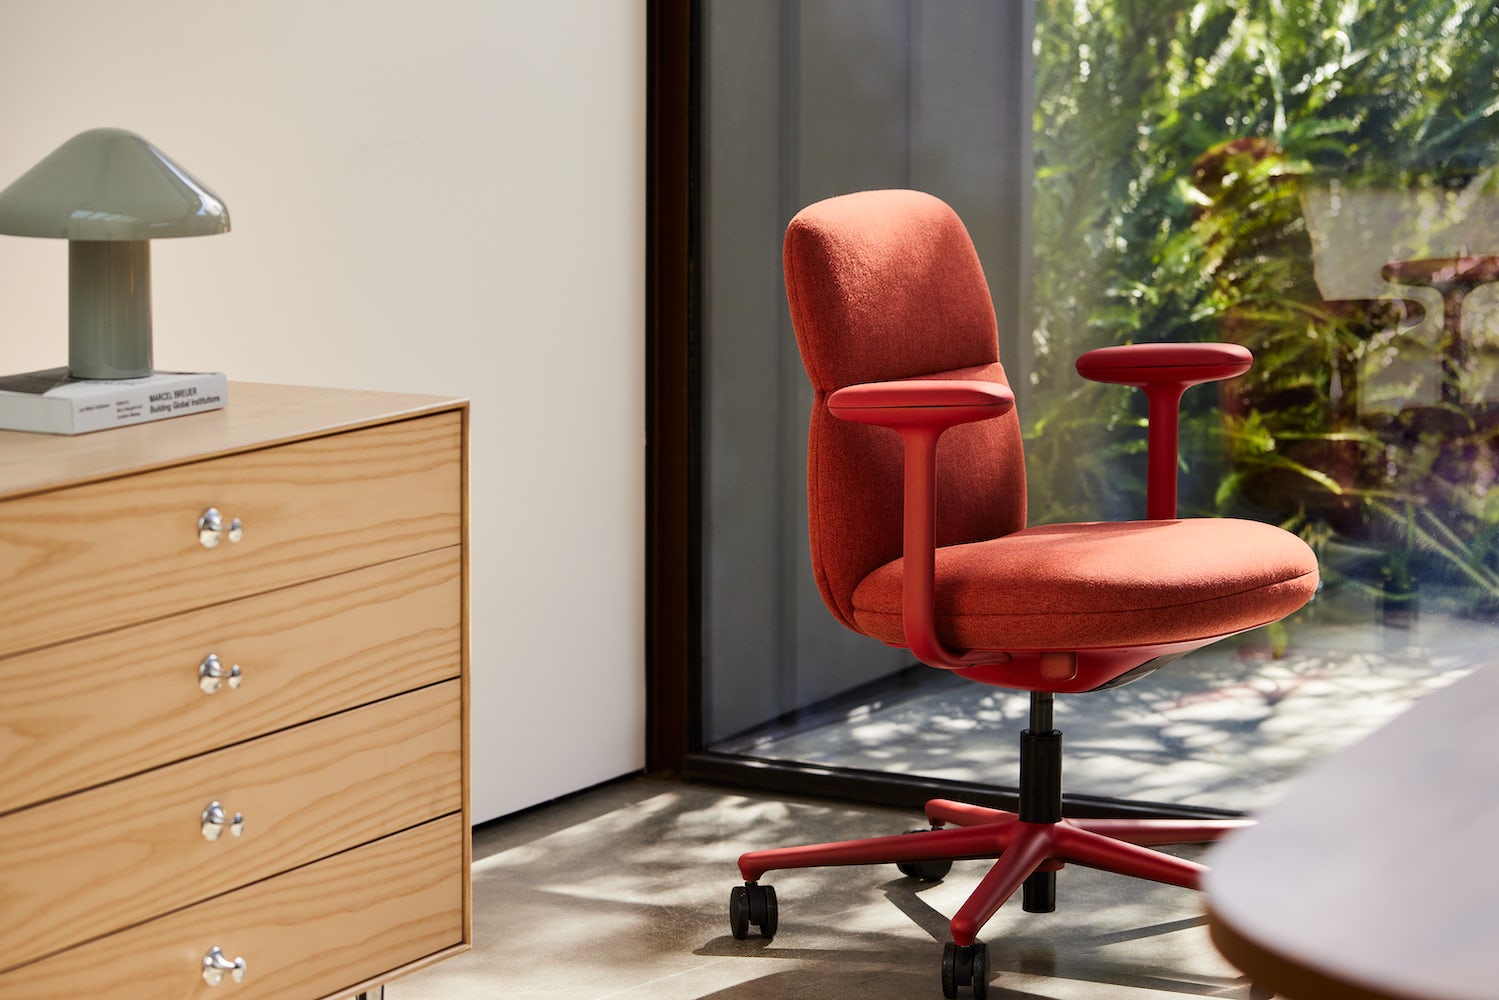 Meet Asari Chair— Combining the performance of a work chair with the joy of a lounge chair.